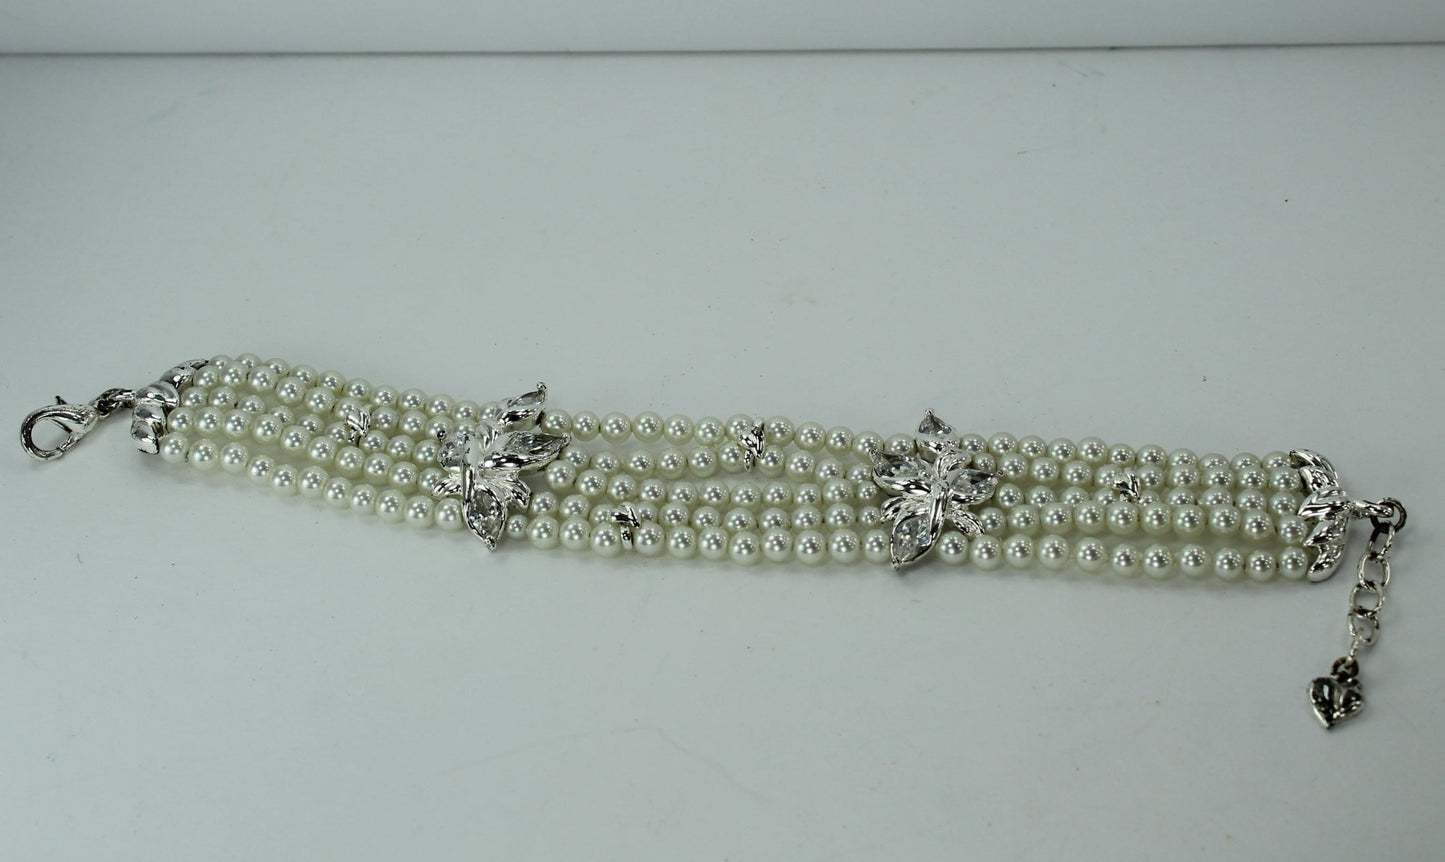 CAROLEE Pearl Bracelet 5 Strand Crystal Flowers Silver Leaves Wedding Accessory special occasion